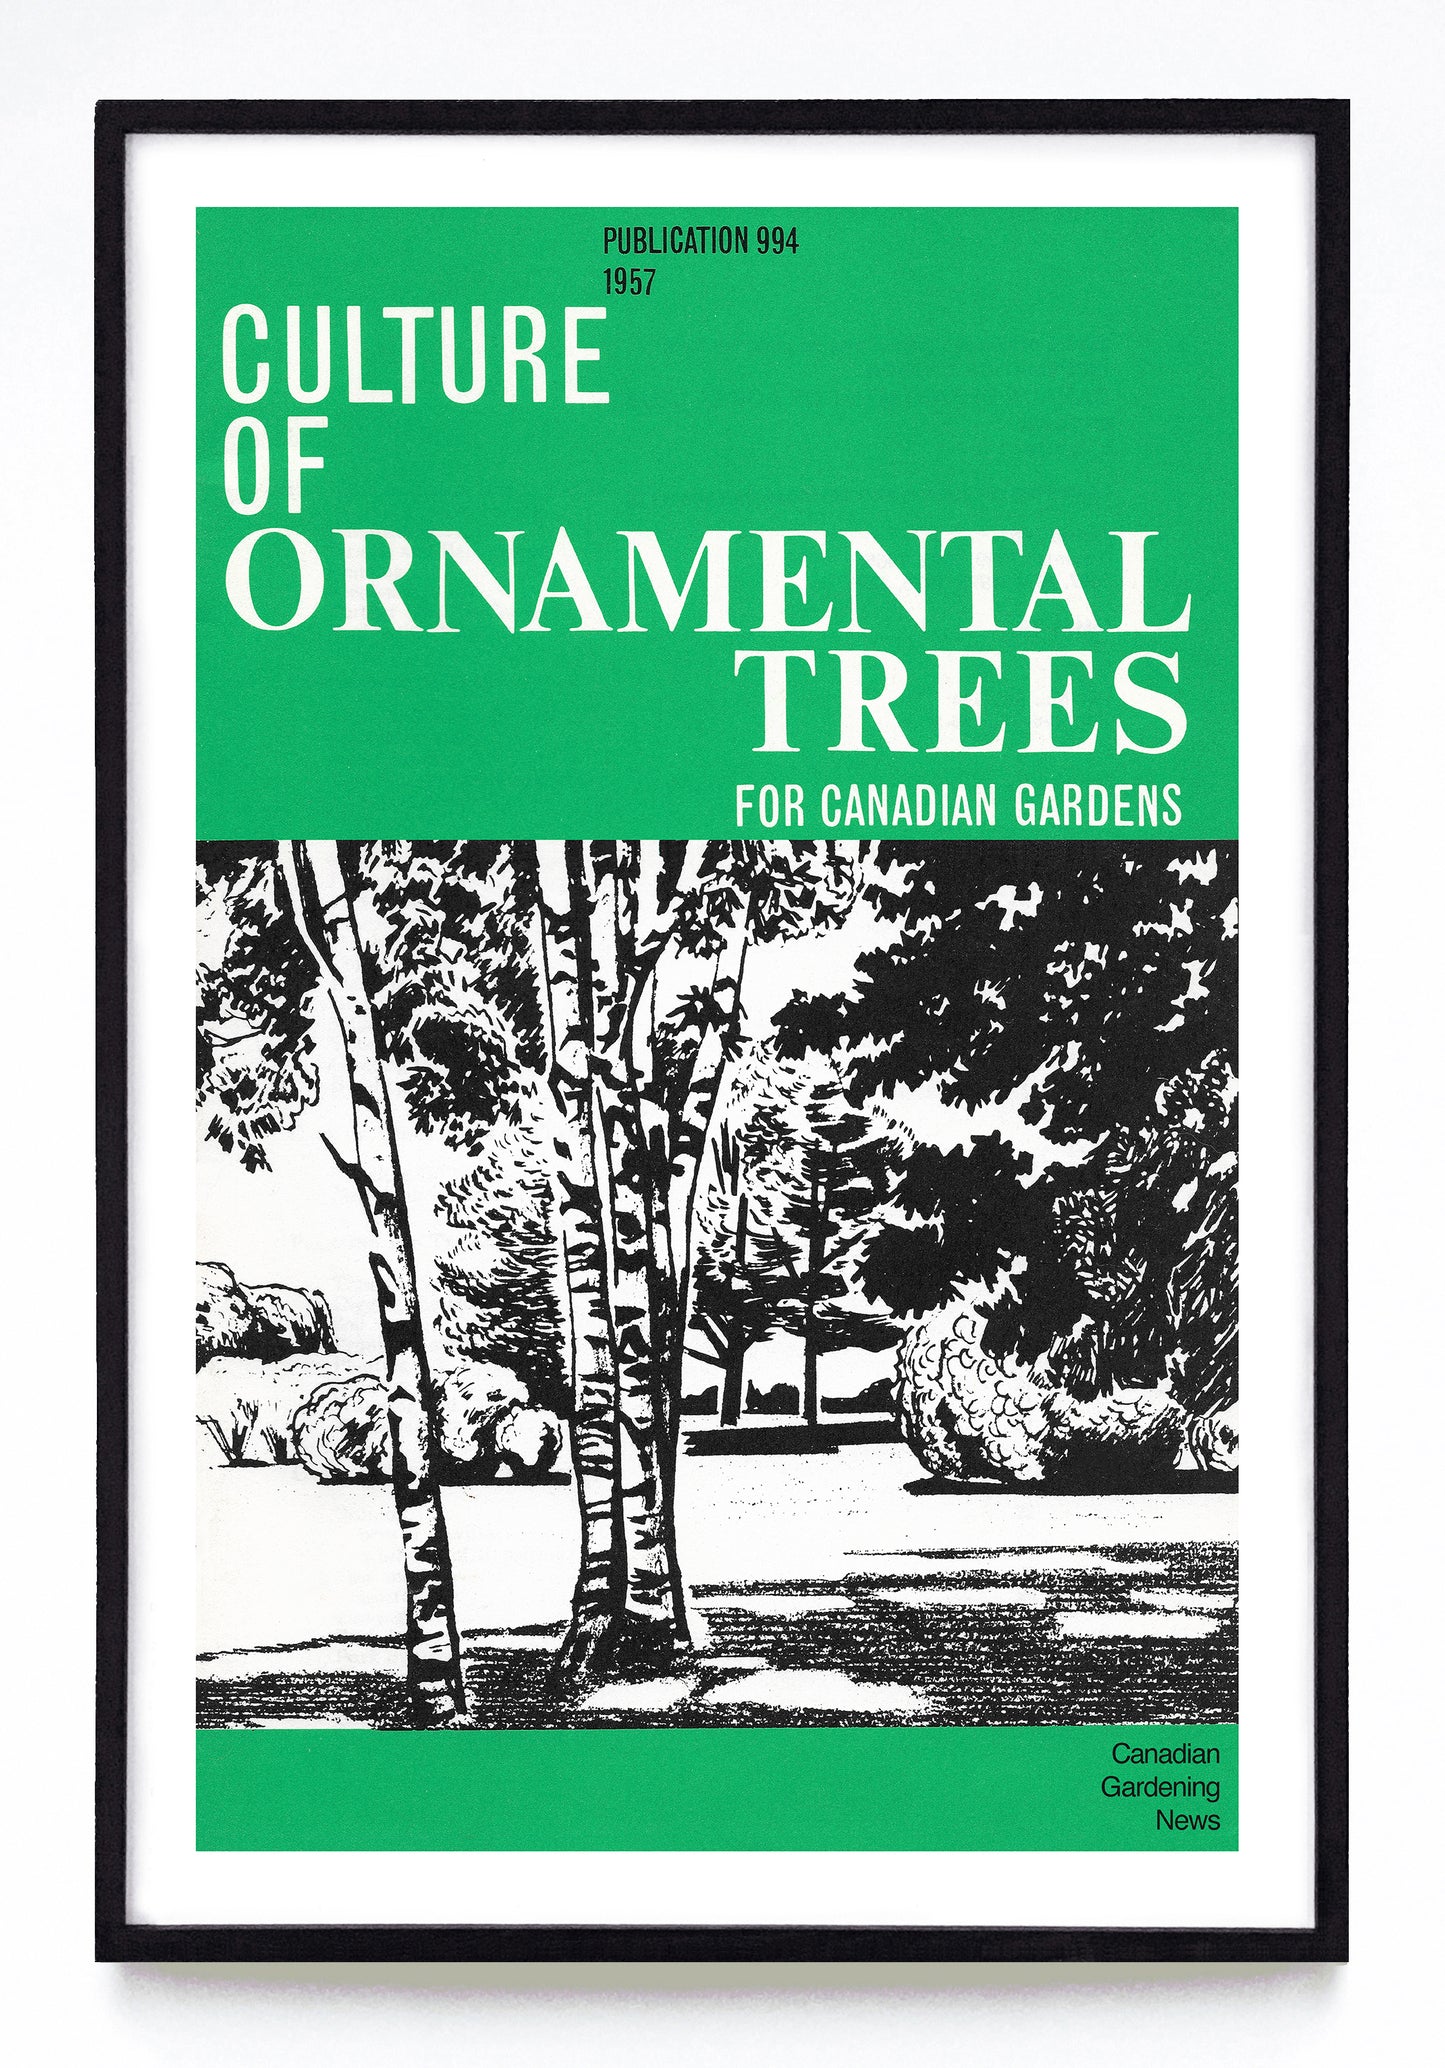 "Culture of Ornamental Trees for Canadian Gardens" print (1957)